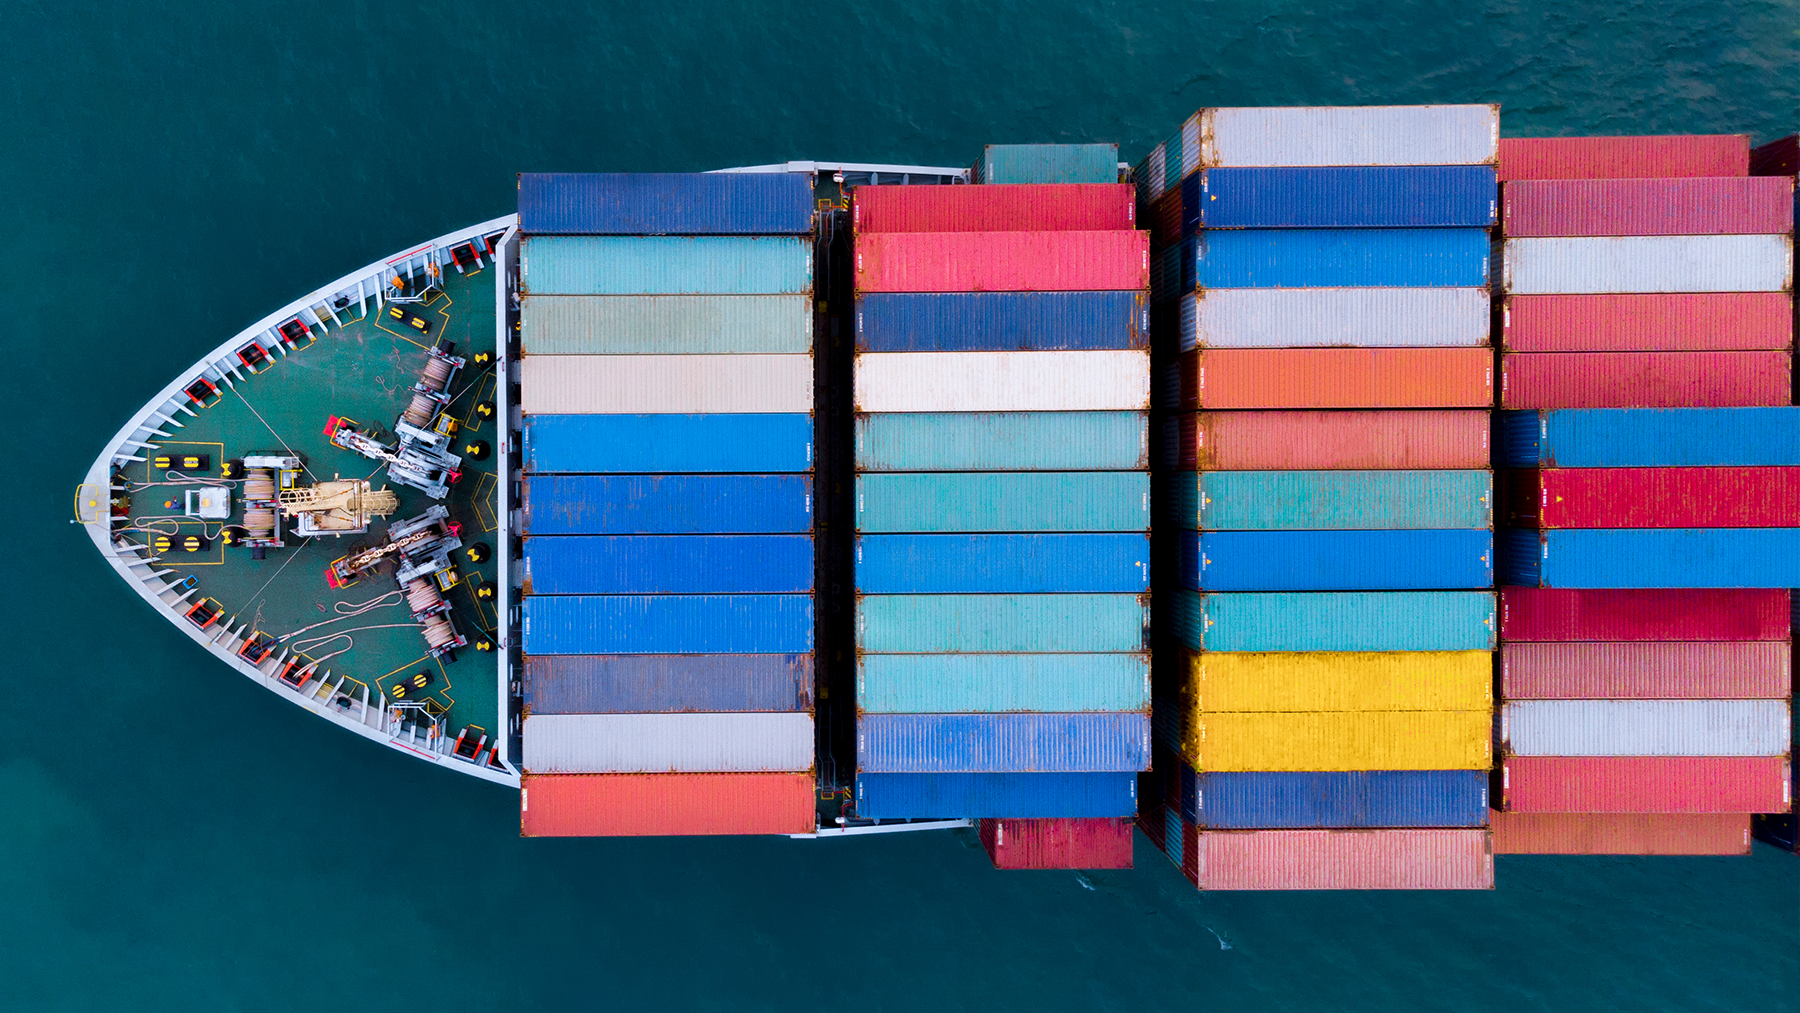 How the Shipping Industry is Disrupting the Clothing Industry